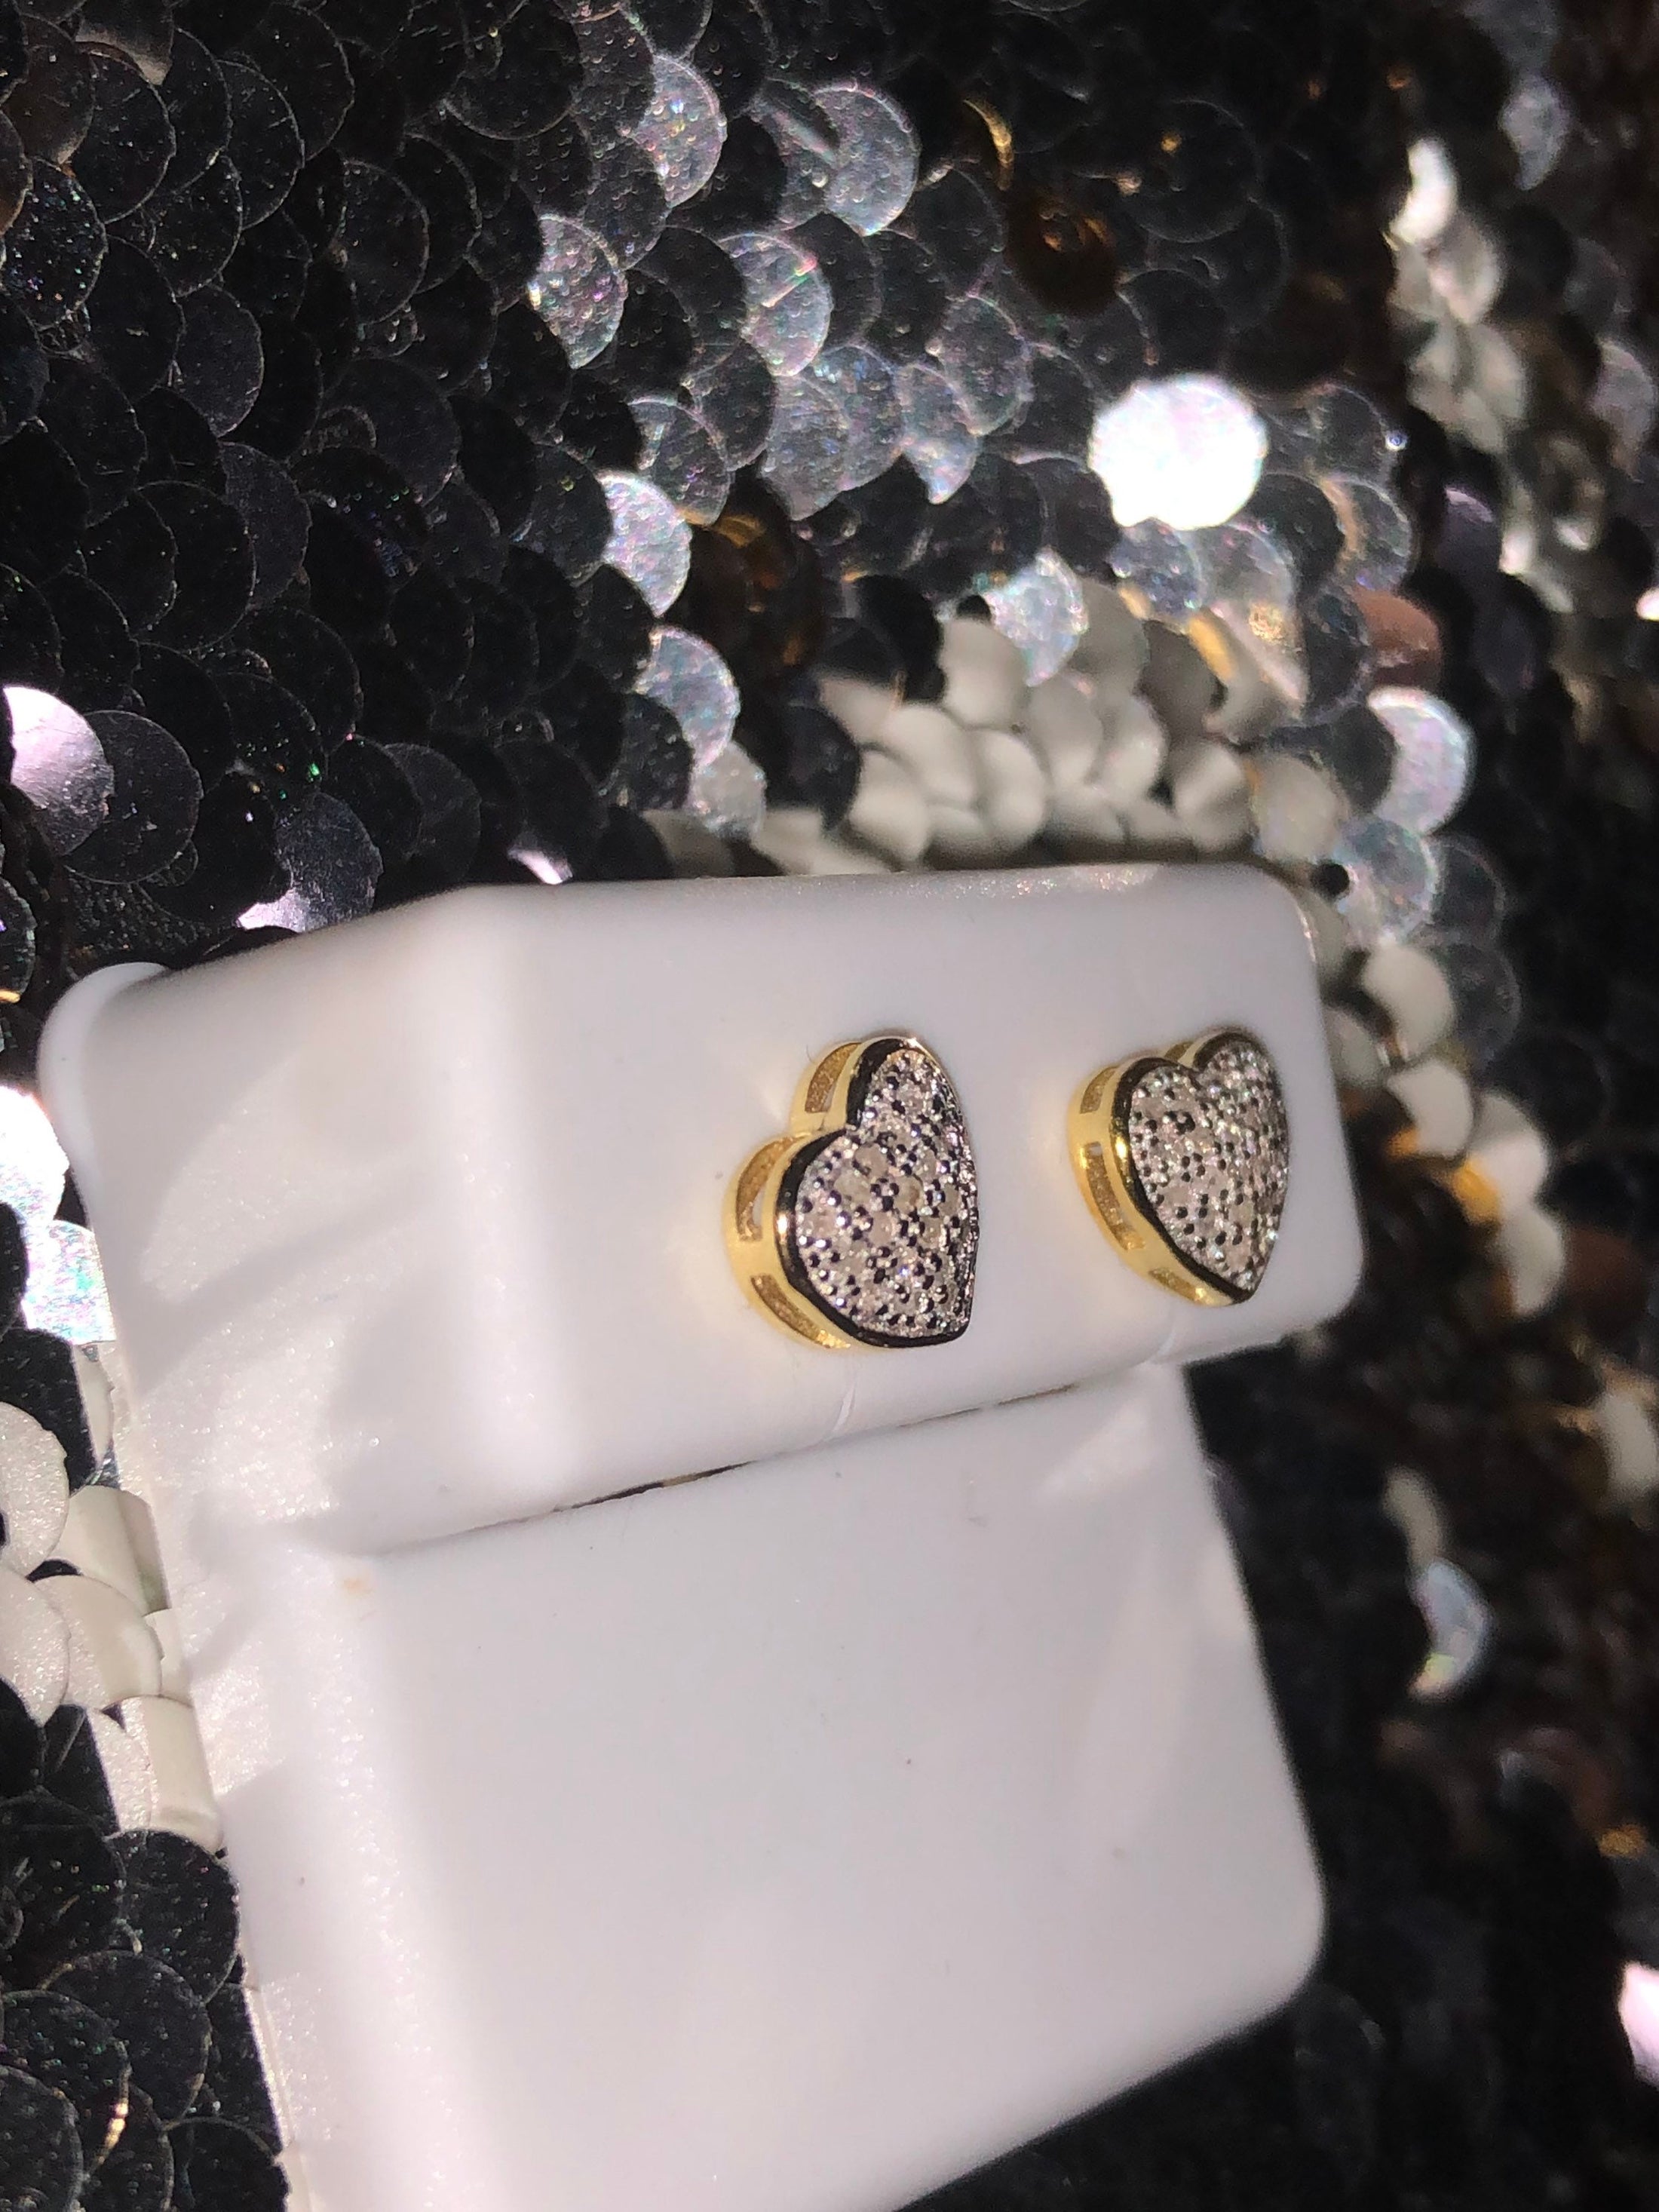 Real diamond puff heart earring stunning gift for holiday anniversary birthday wedding so beautiful huge sale limited fast shipping!